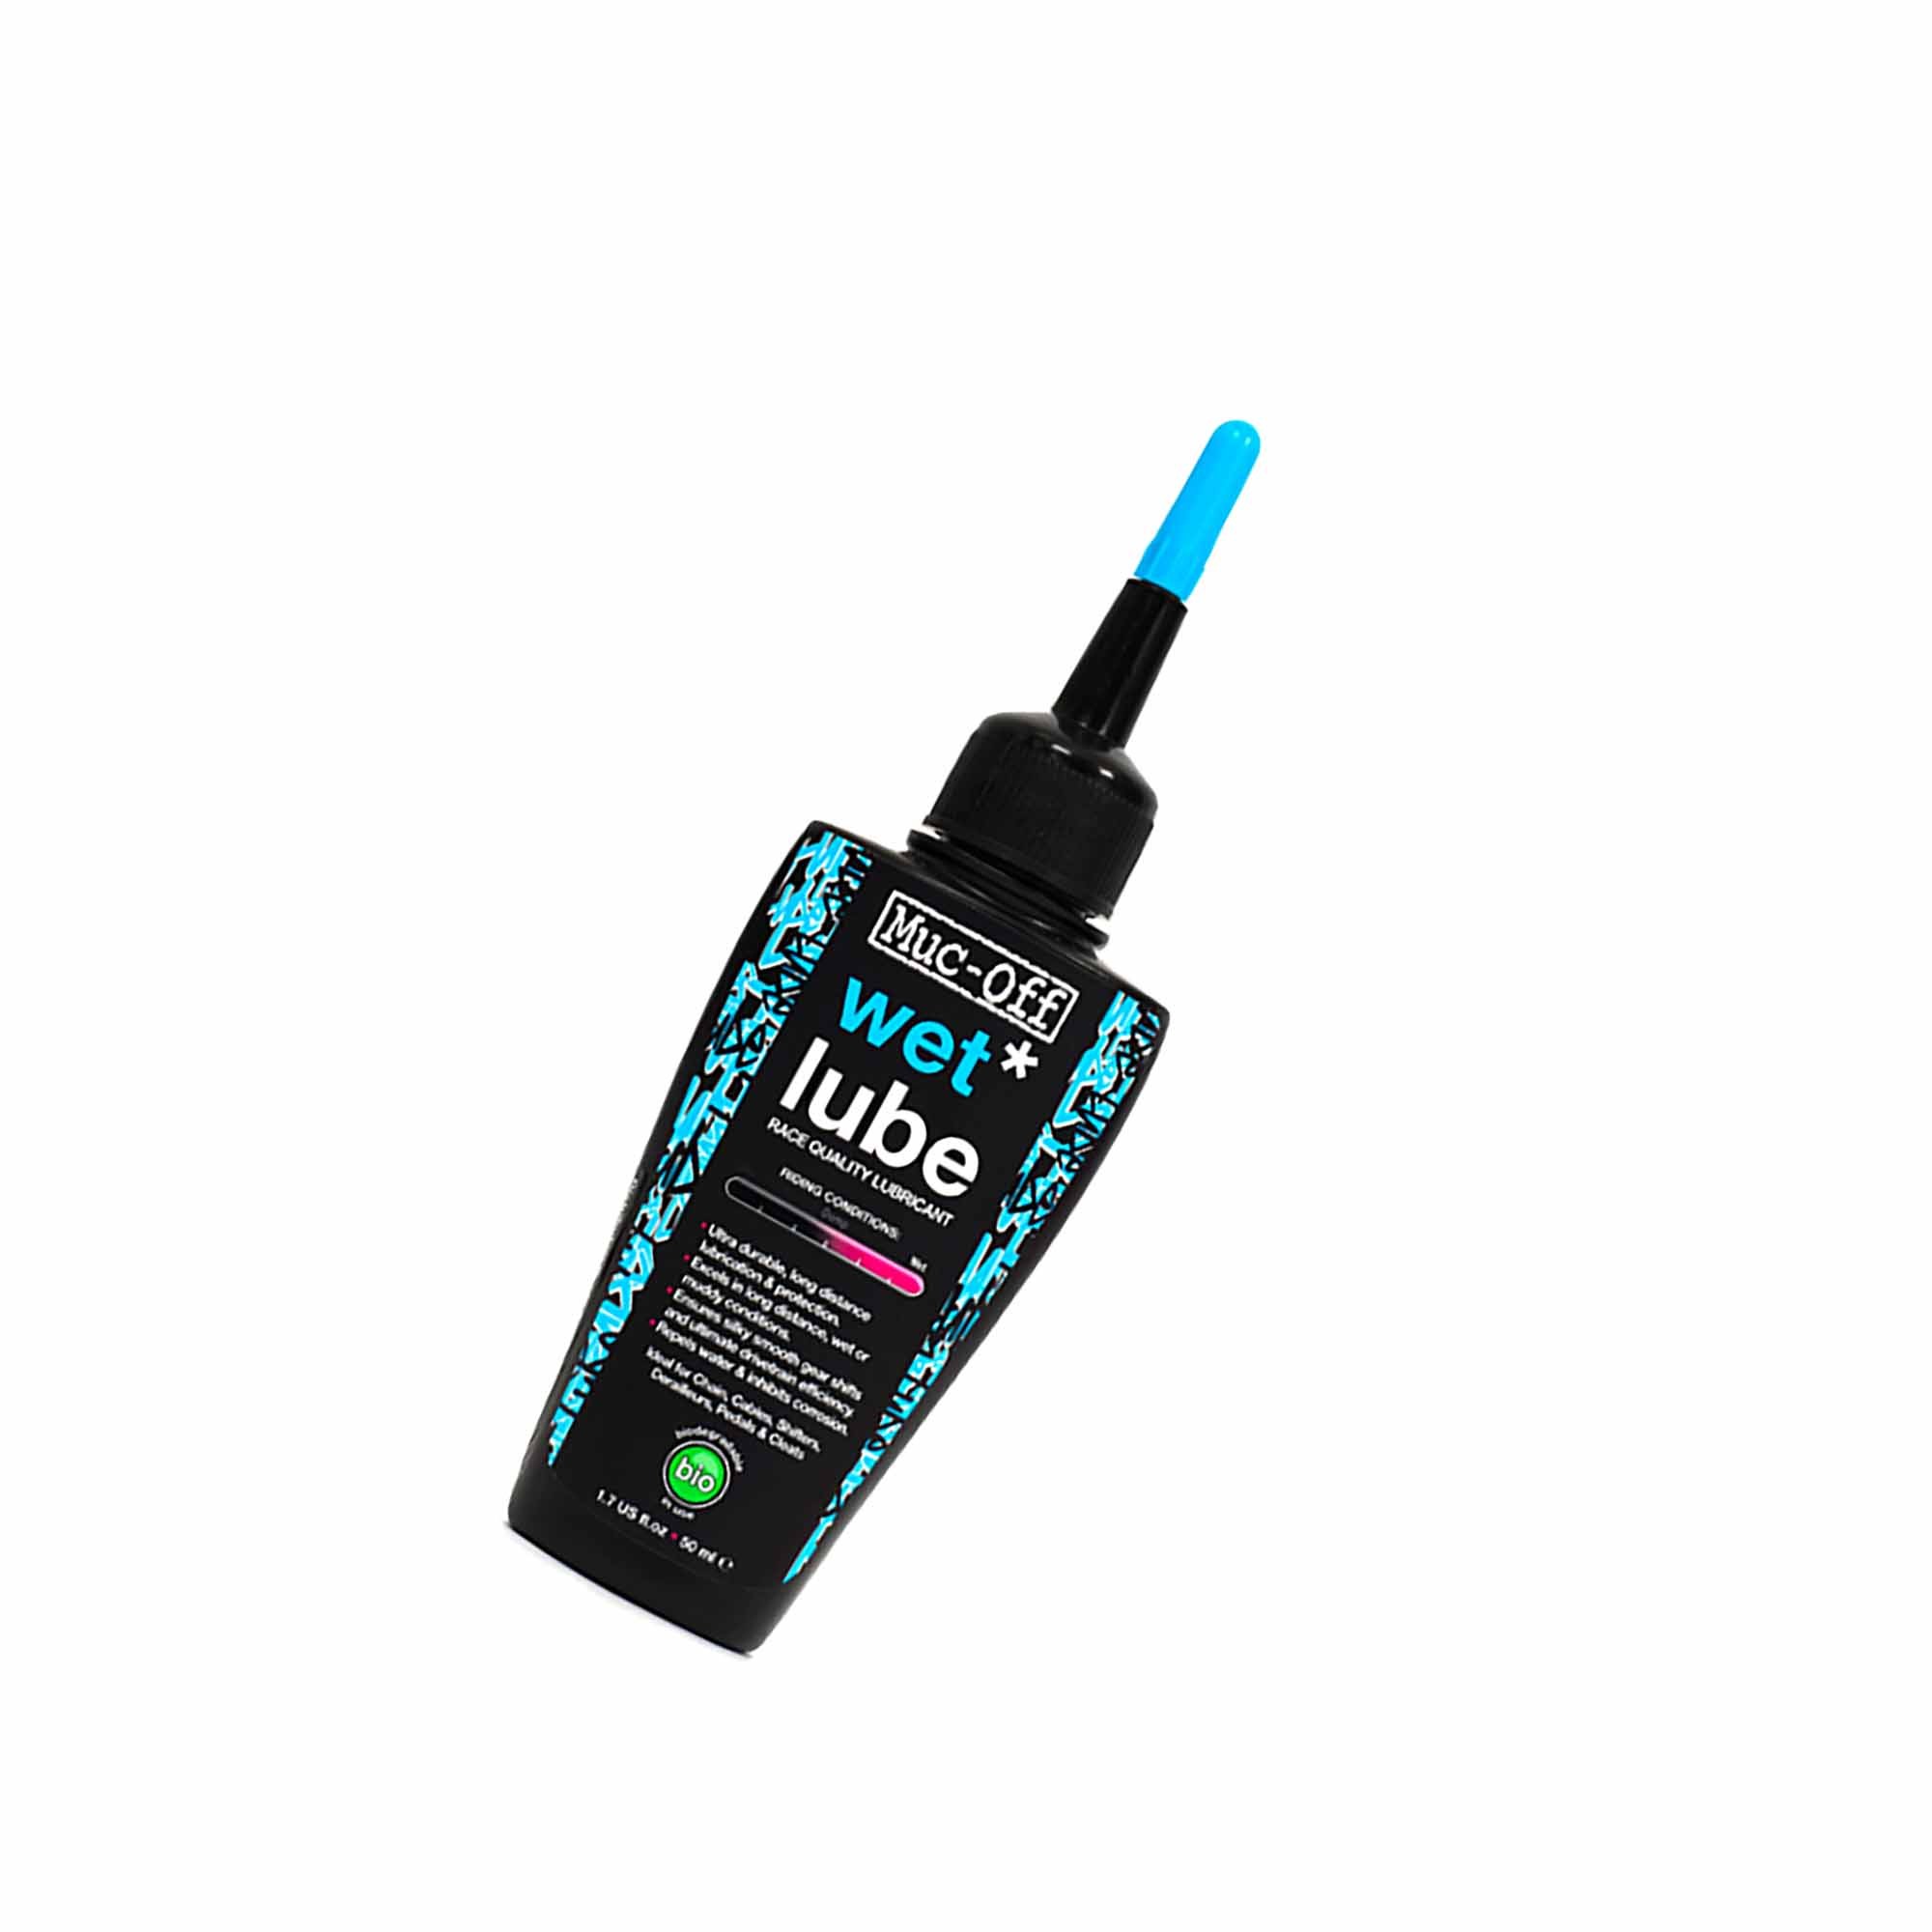 Lubrifiant chaine Muc-Off conditions humides "Wet Lube" 50ml